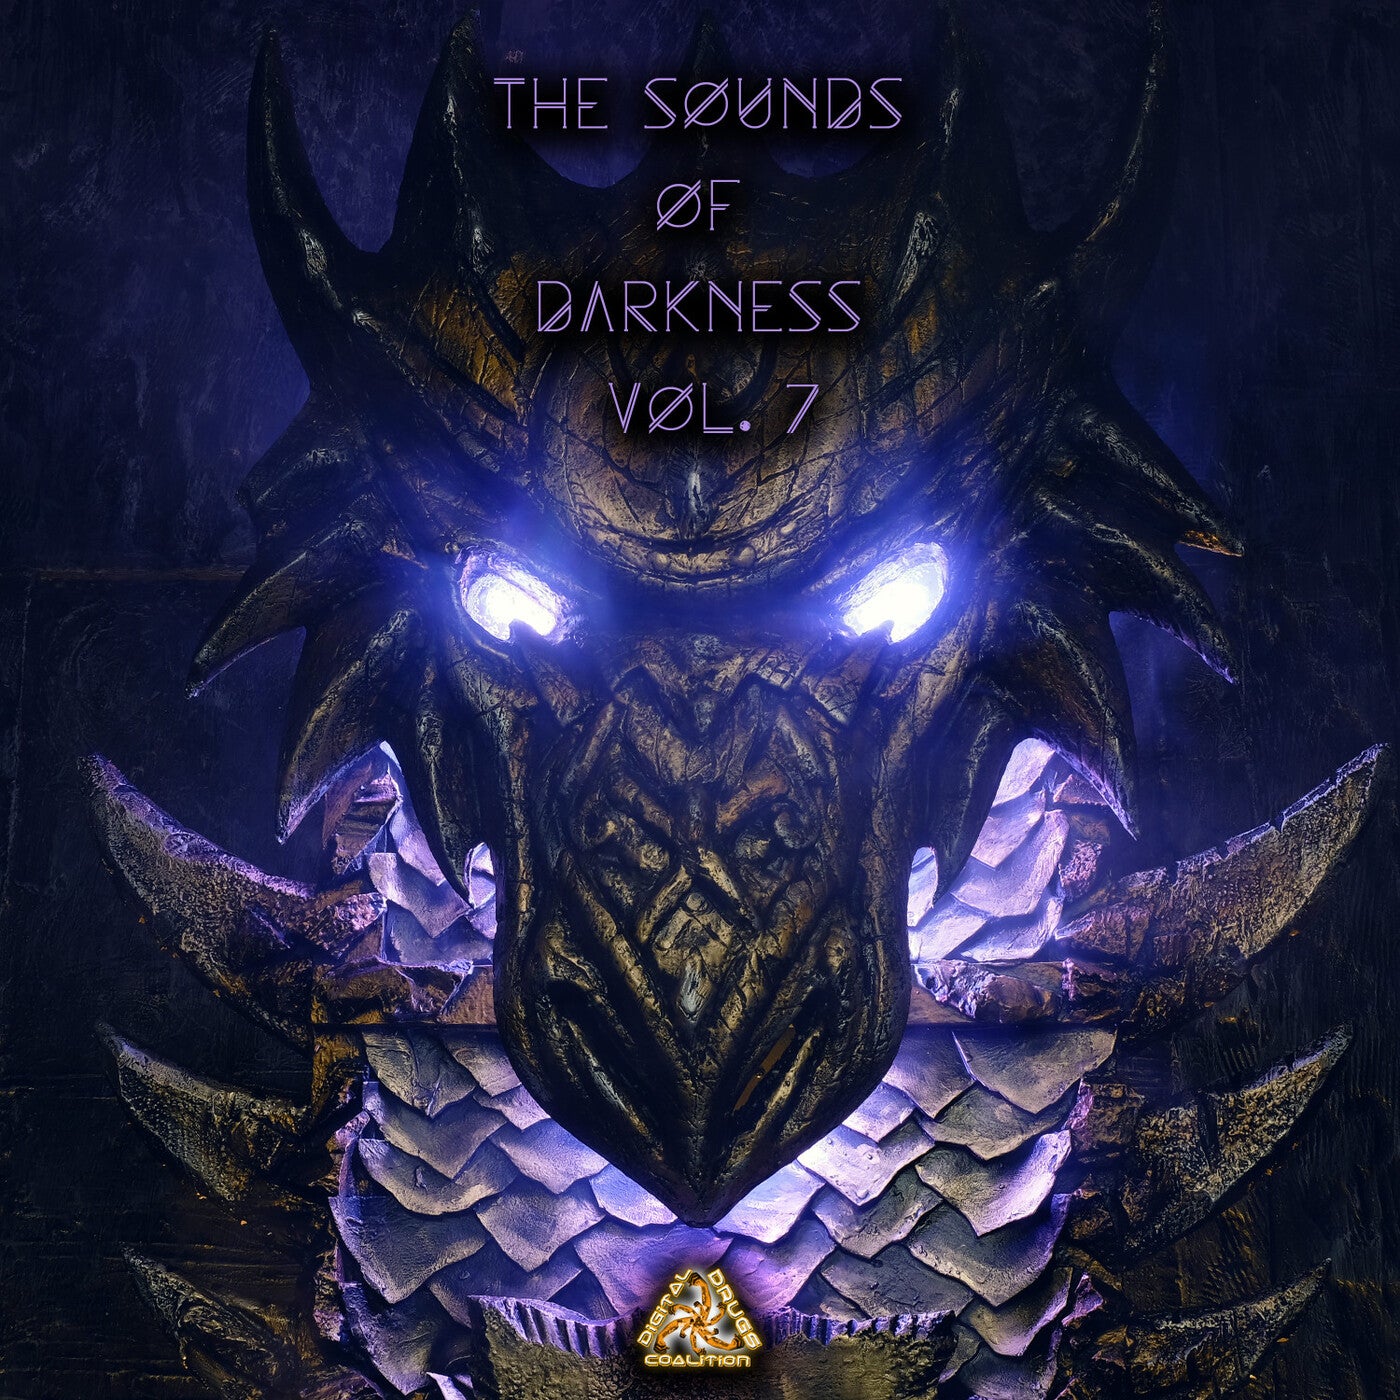 The Sounds Of Darkness, Vol. 7 (Psy Trance Dj Mixed)